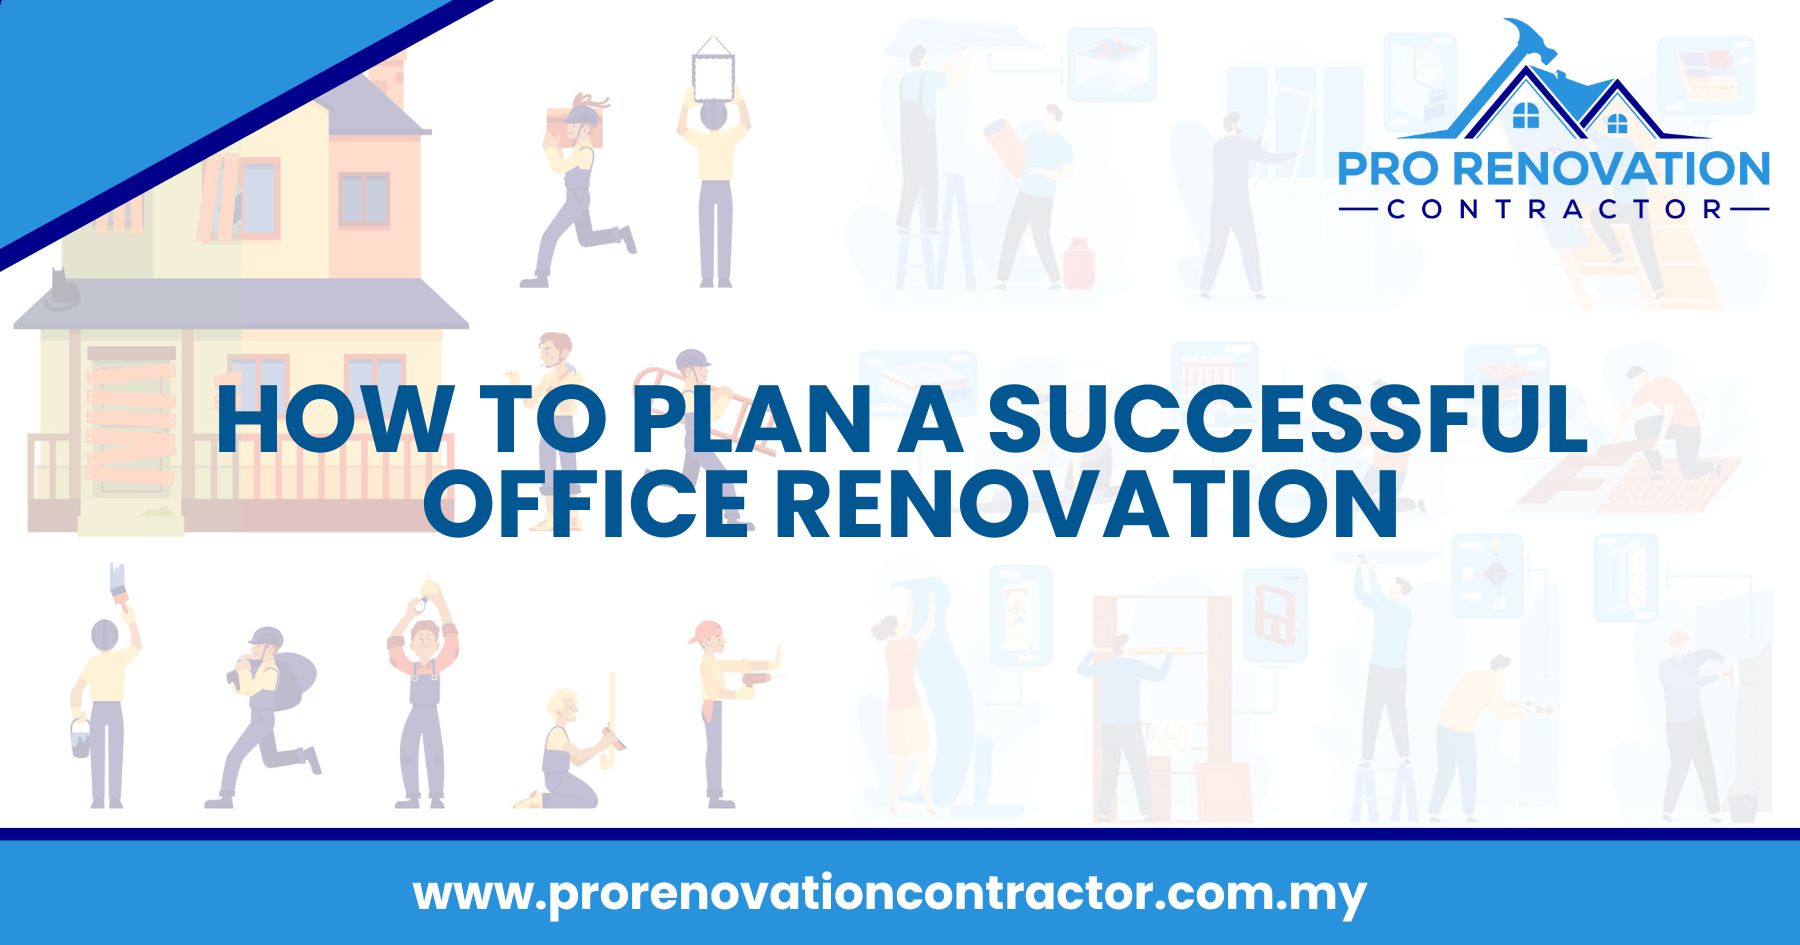 How to Plan a Successful Office Renovation